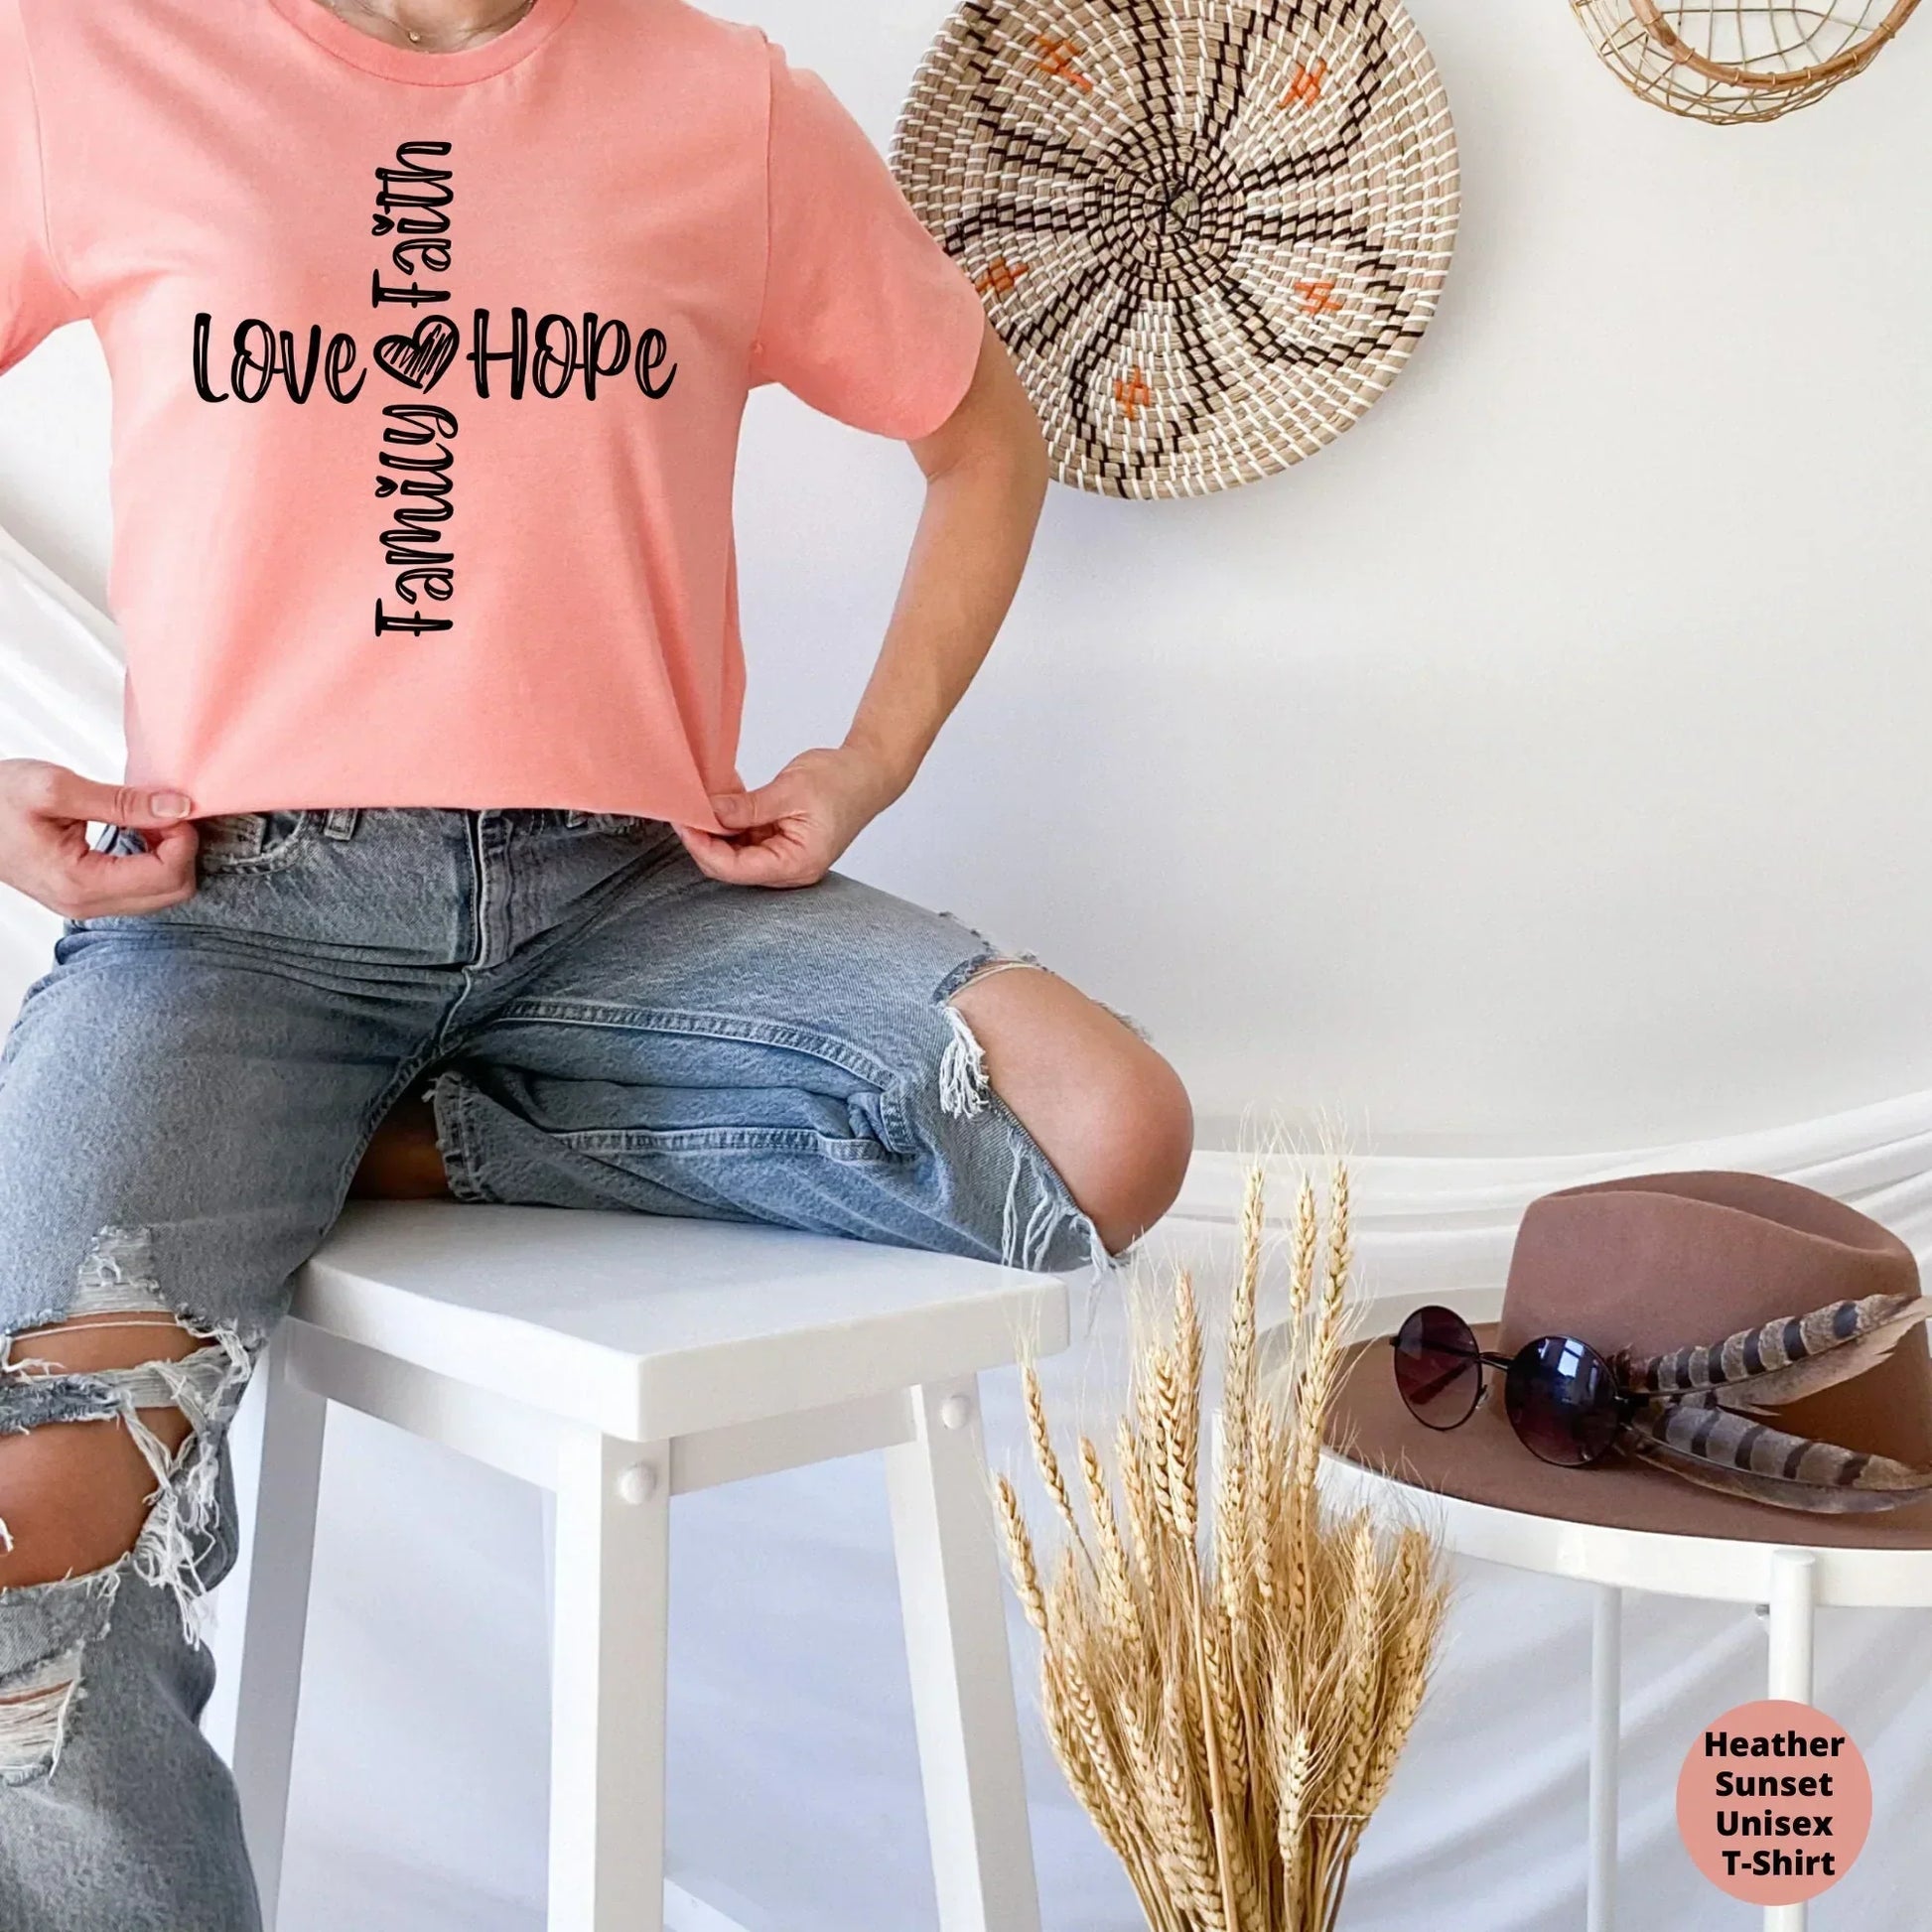 Christian Shirt, Love Faith Hope Family Sweatshirt, Jesus Inspired, I love God Hoodie, Biblical Religious Gifts, Blessed Highly Favored Tops